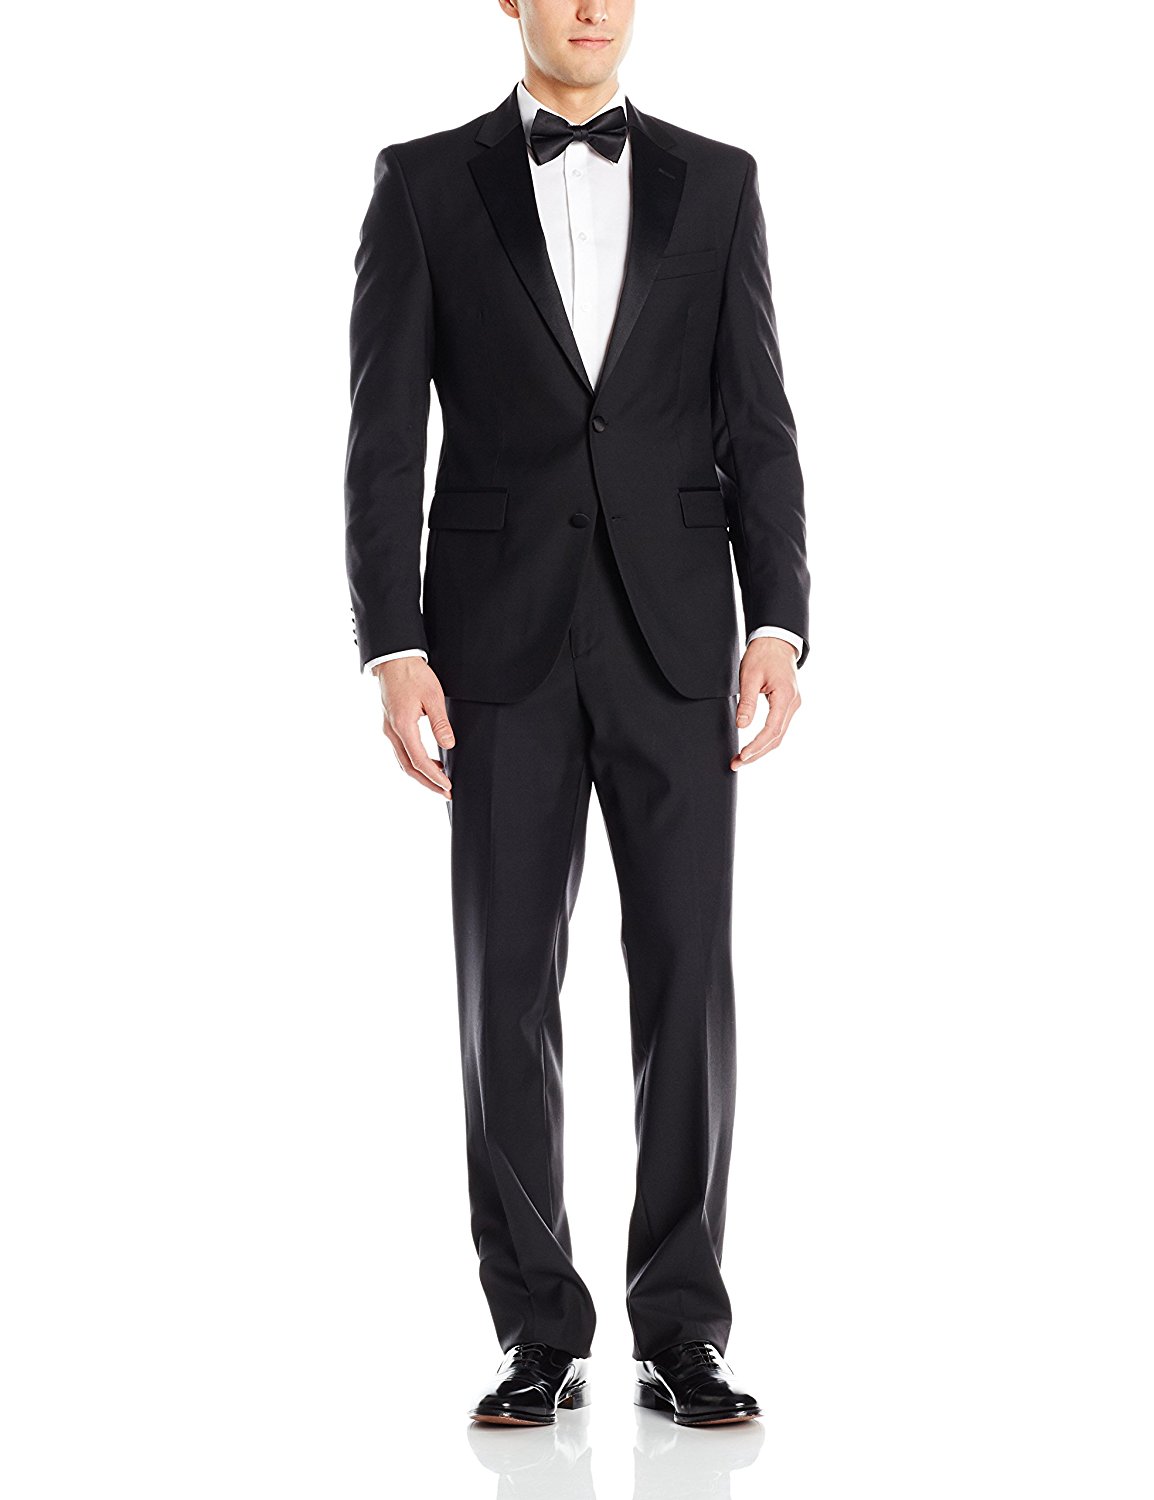 10 Best Men’s Wedding Tuxedos Your Easy Buying Guide